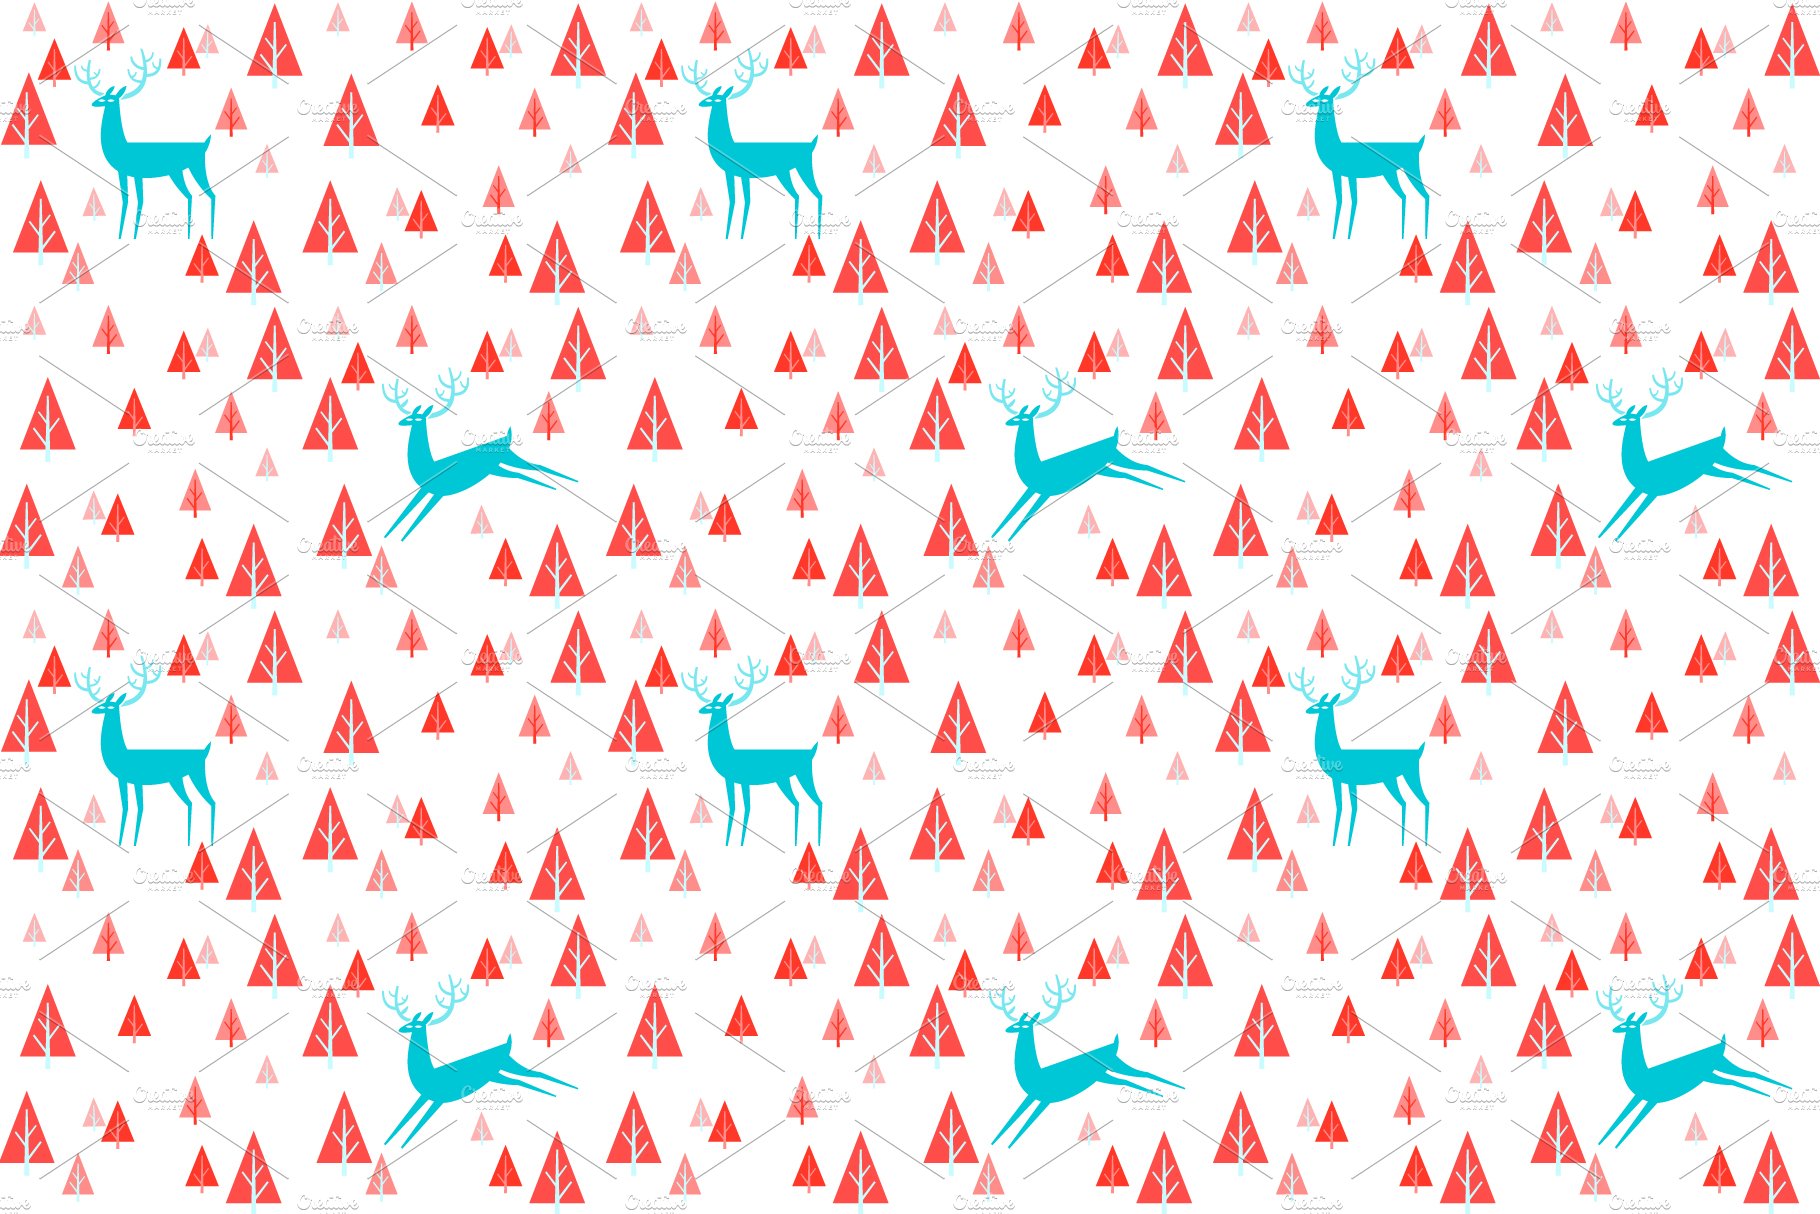 8 Foxes and Deers Seamless Patterns.